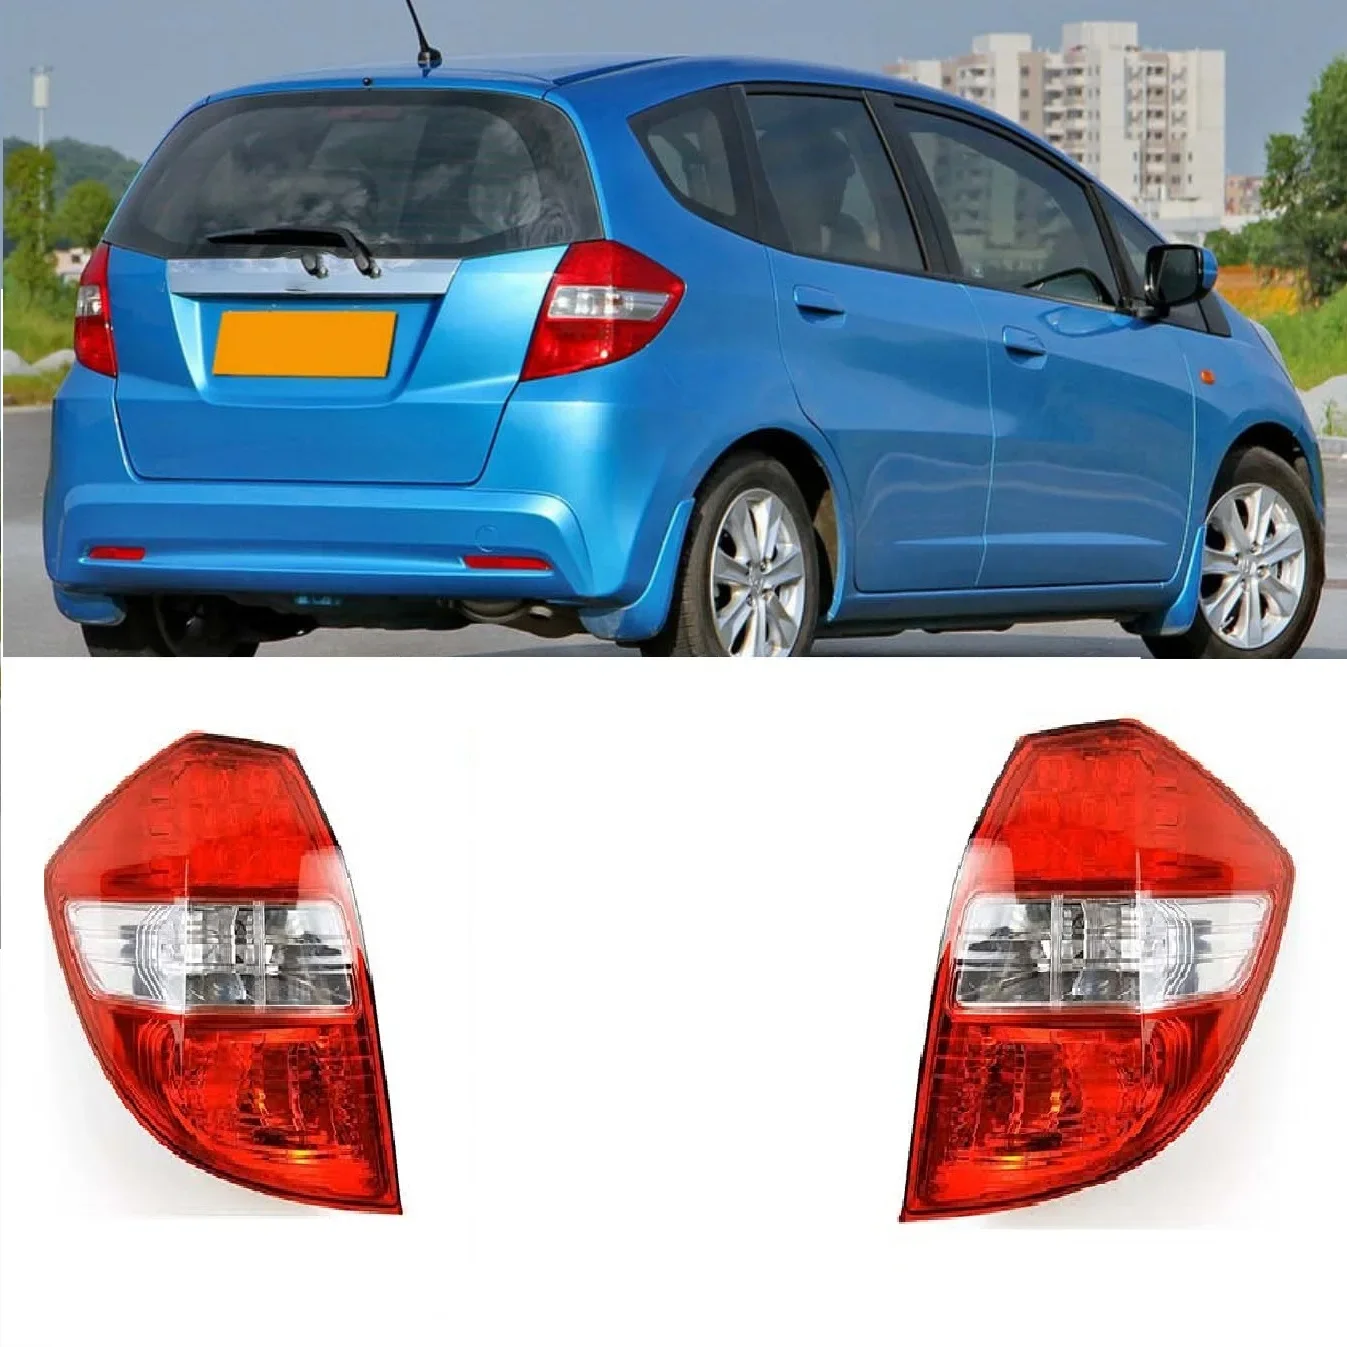 

Rear Brake Tail Lamp Tail light Taillight Rear Light For Honda JAZZ FIT Hatchback 2011 2012 2013 Without Lamp Bulb